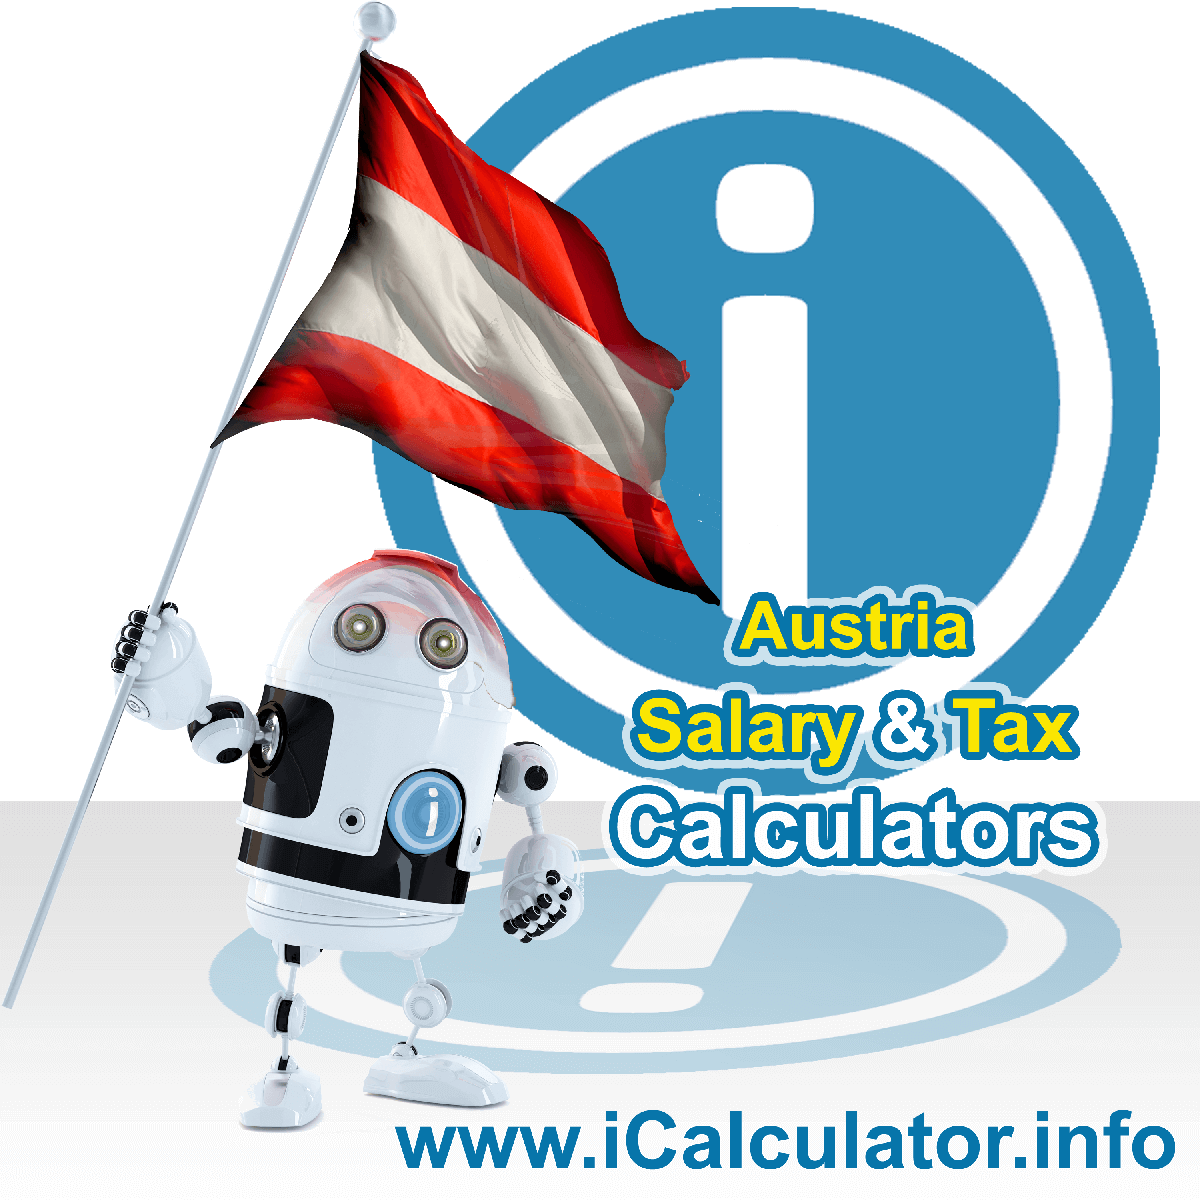 Austria Wage Calculator. This image shows the Austria flag and information relating to the tax formula for the Austria Tax Calculator